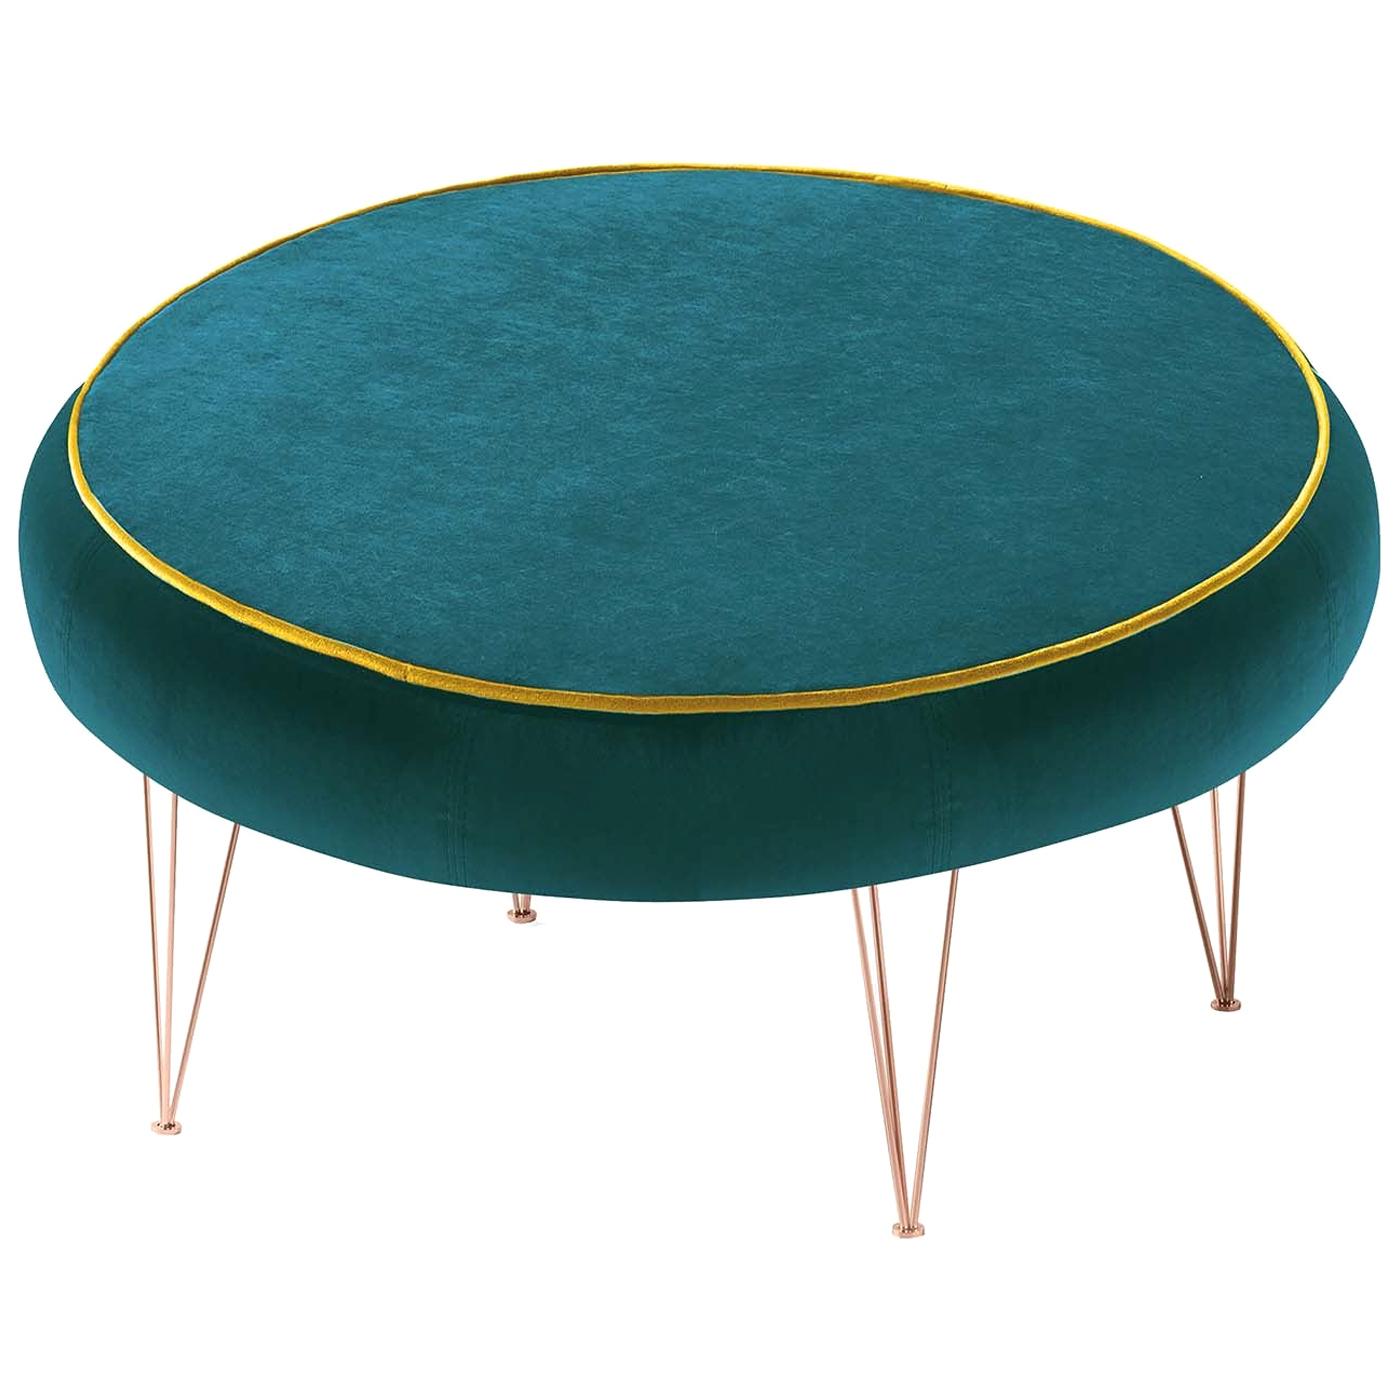 Pills Green Round Pouf with Copper Legs